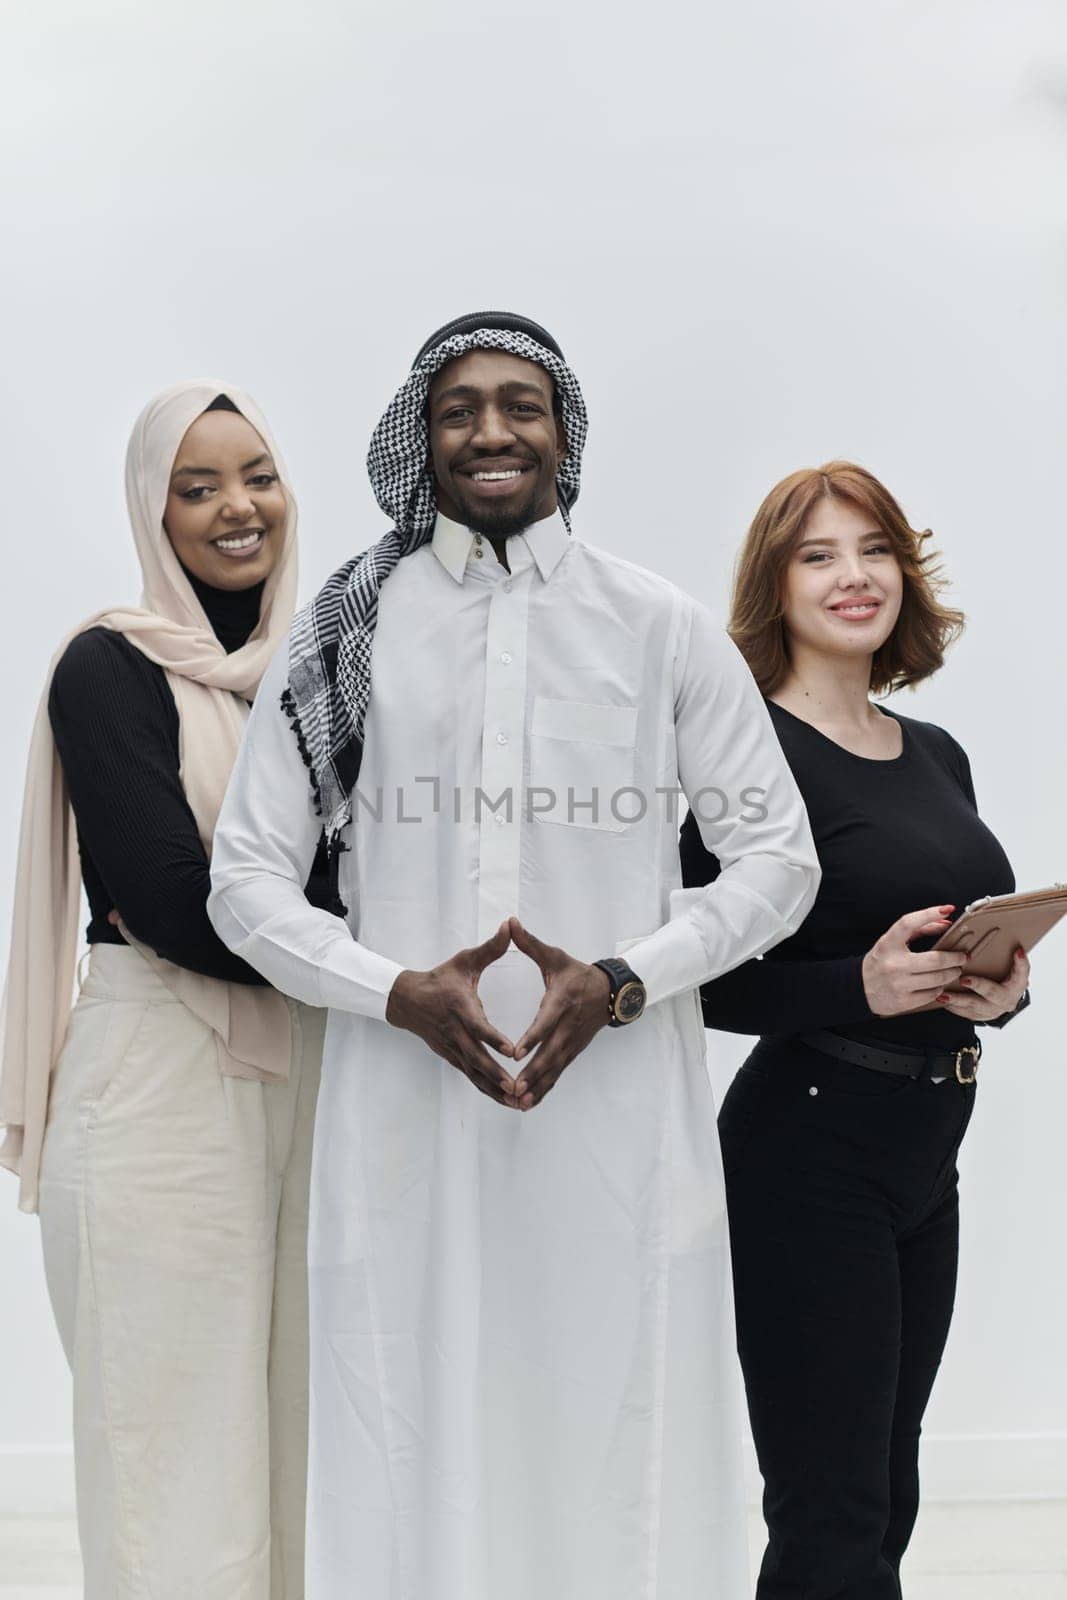 Arabic businessman stands confidently alongside two businesswomen, portraying a poised and diverse team that embodies ambition, innovation, and visionary leadership against a pristine white background.